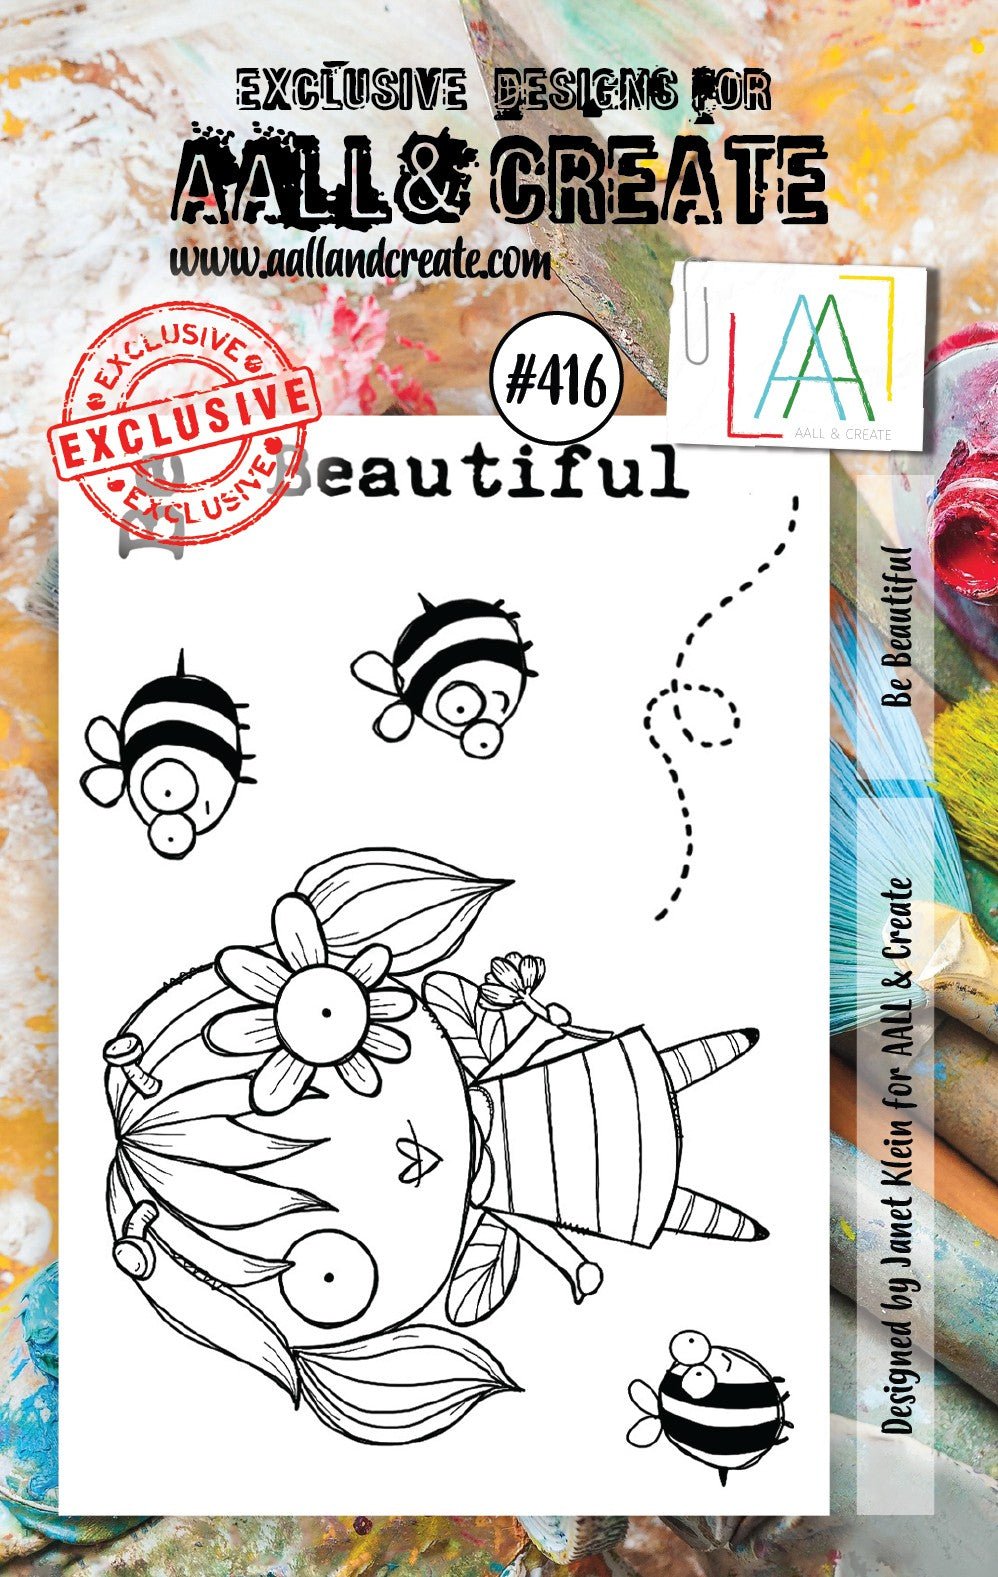 Aall and Create - Be Beautiful - A7 - Designer Janet Klein - Clear Stamp Set - #416 Aall & Create